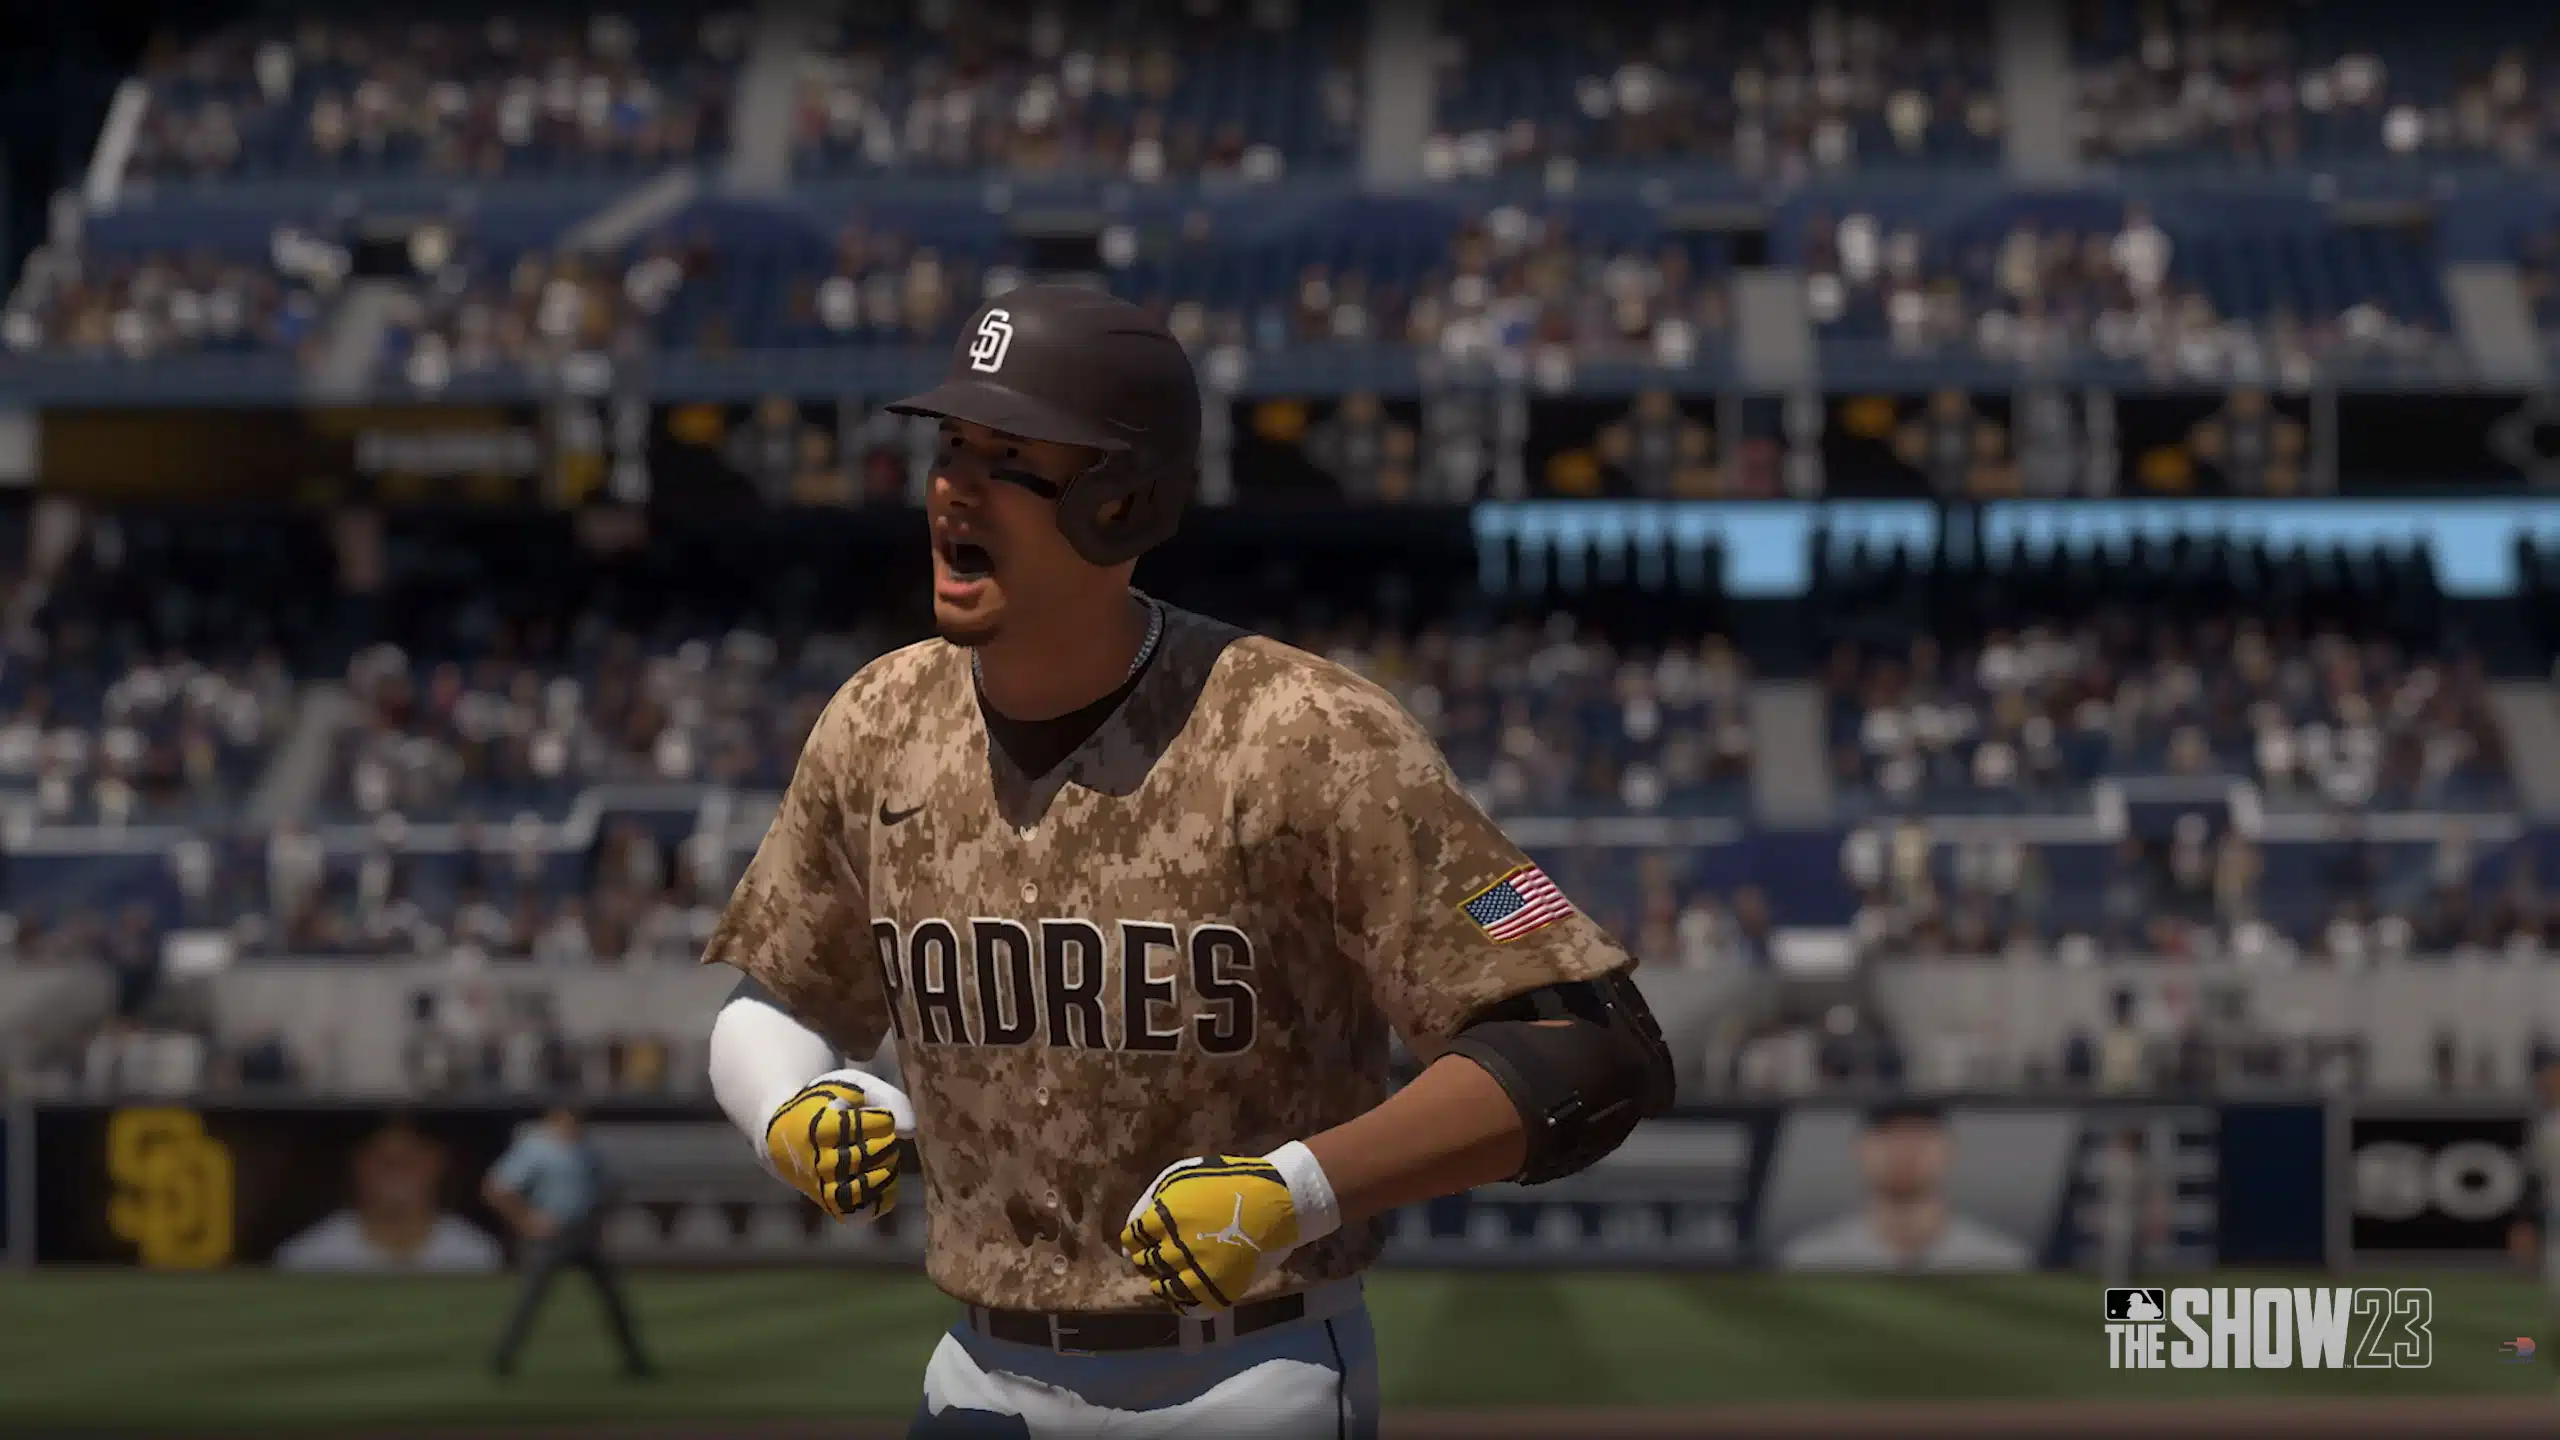 MLB The Show 23 Update 1.08